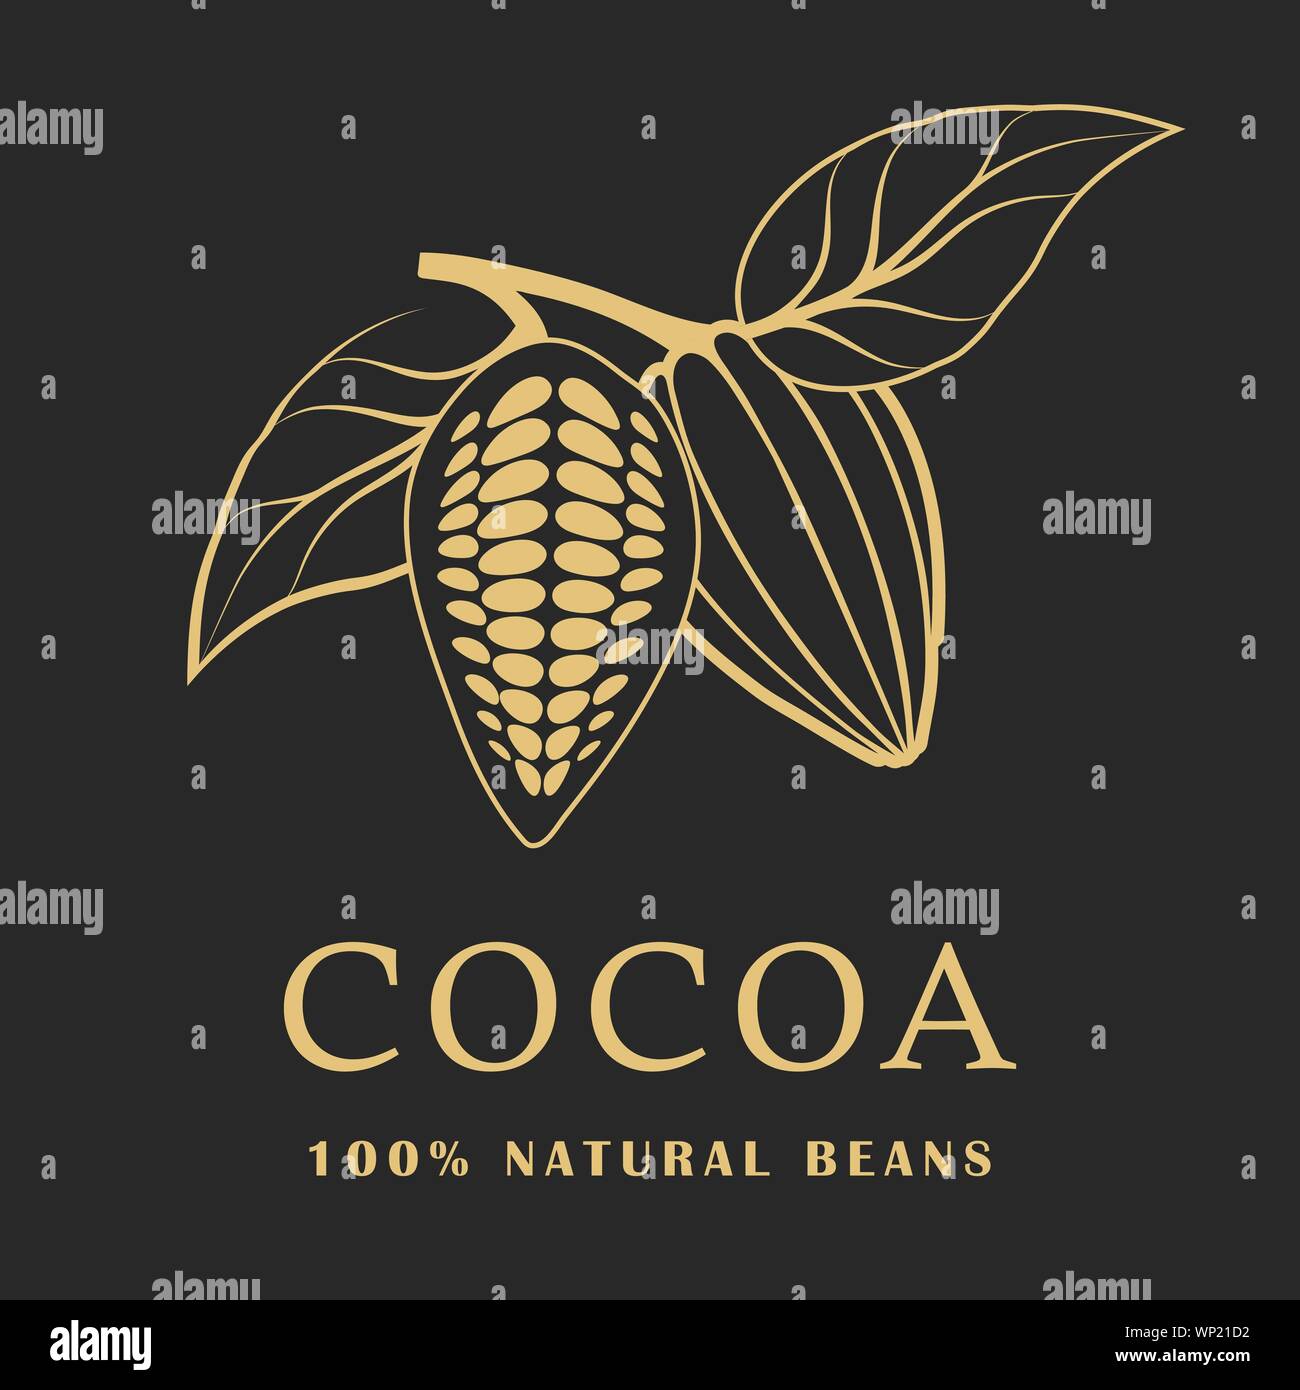 Cocoa beans with leaves on dark background. Cacao logo. Vector illustration. Stock Vector